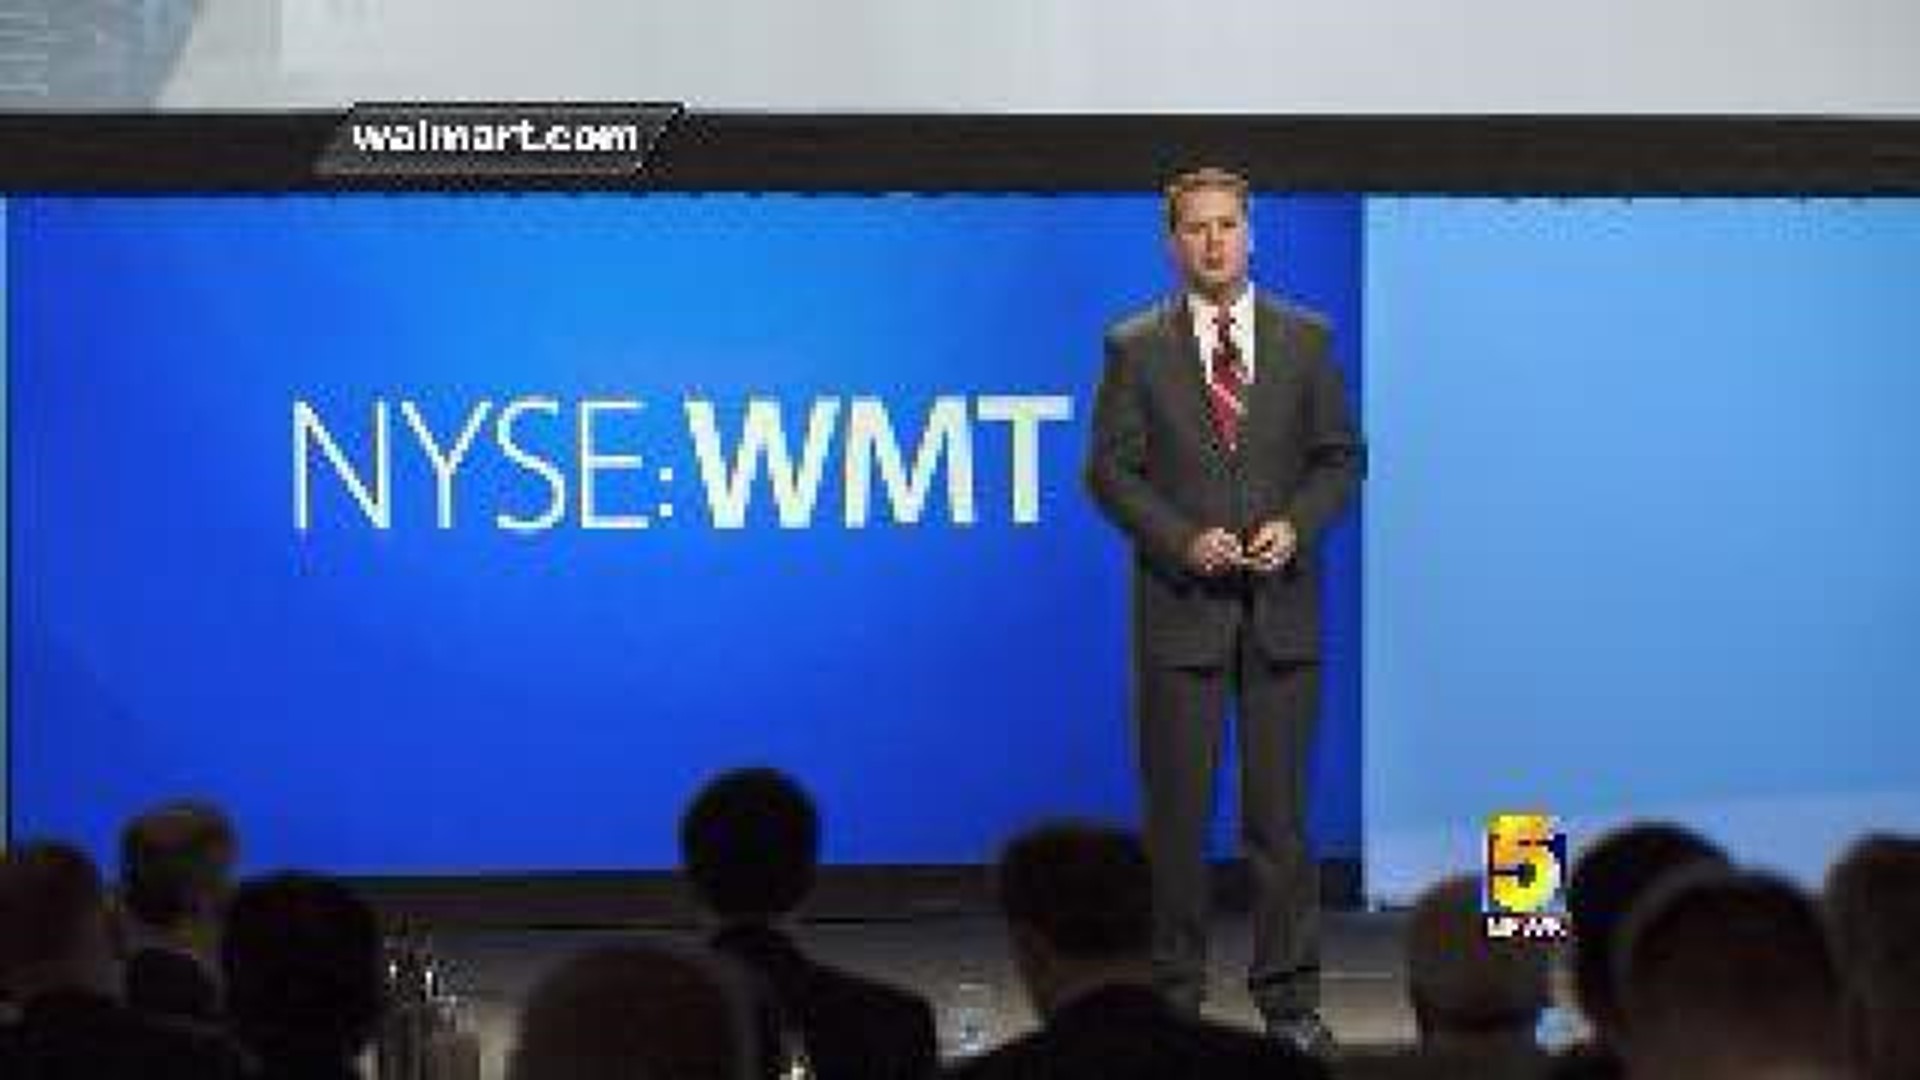 Wal-Mart Announces New CEO